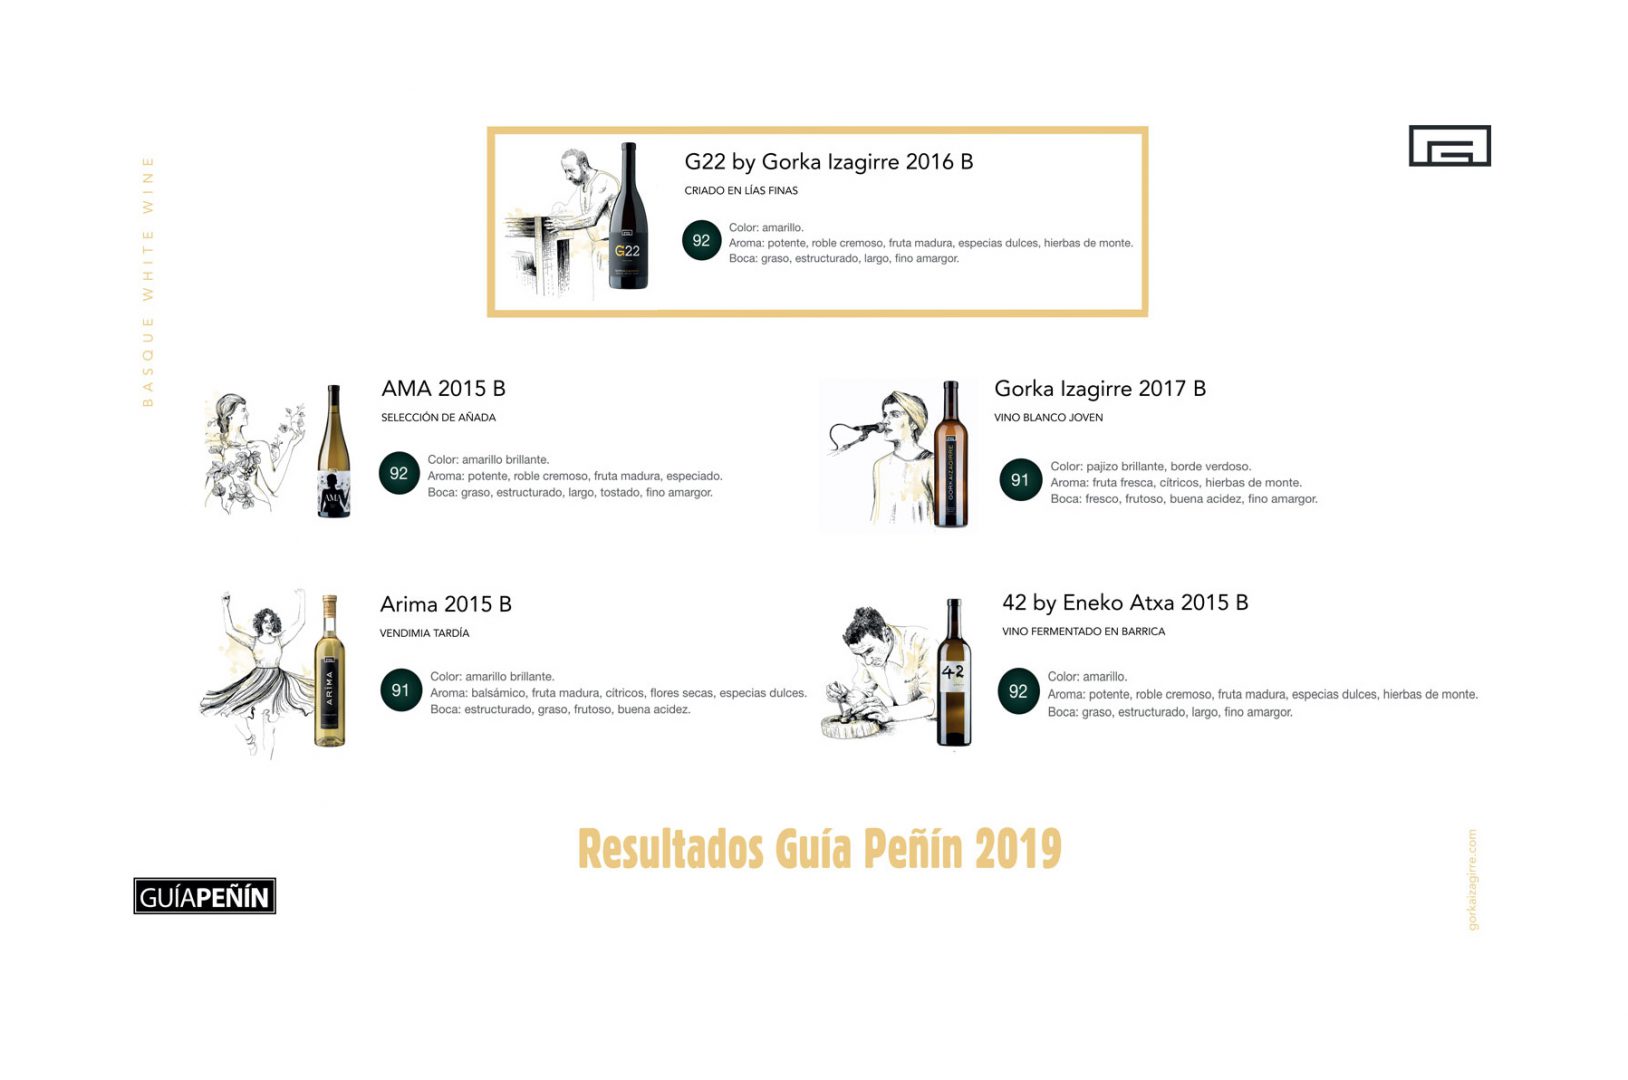 All Gorka Izagirre txakolis get more than 91 points in the Peñín Guide 2019